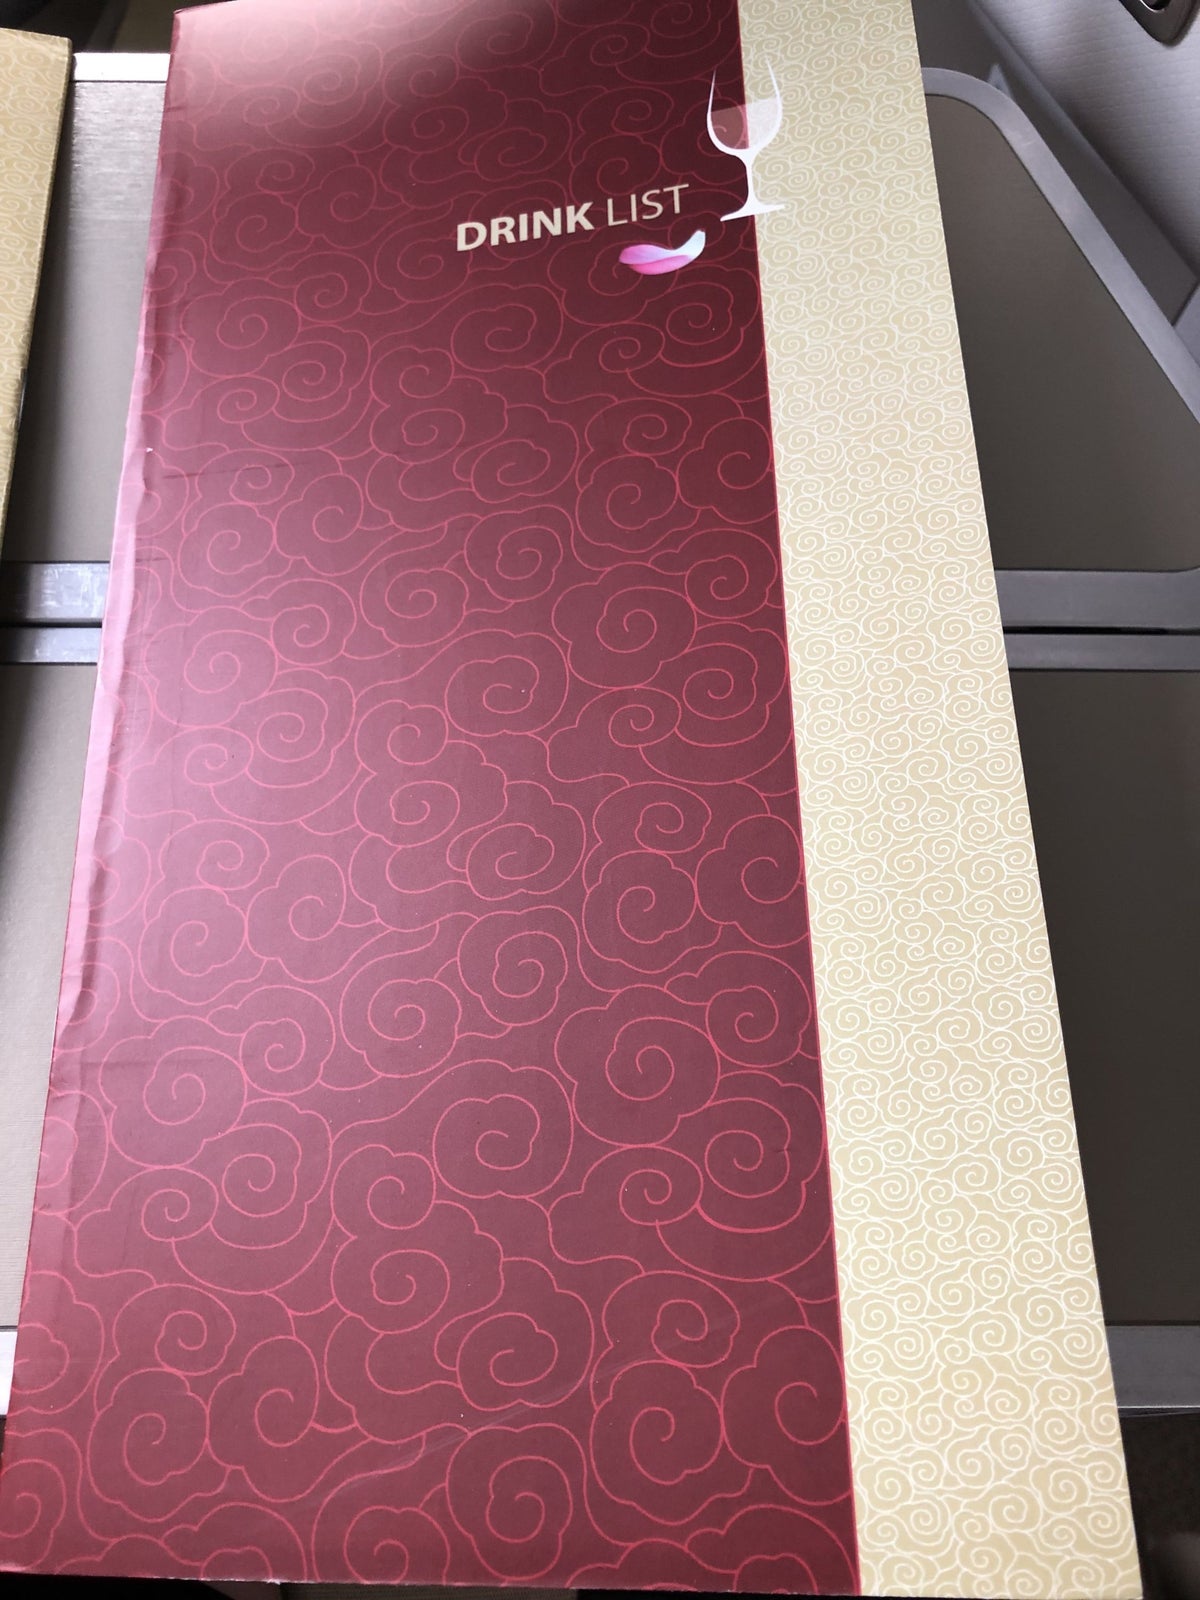 Vietnam Airlines 787-9 business class drink menu cover page